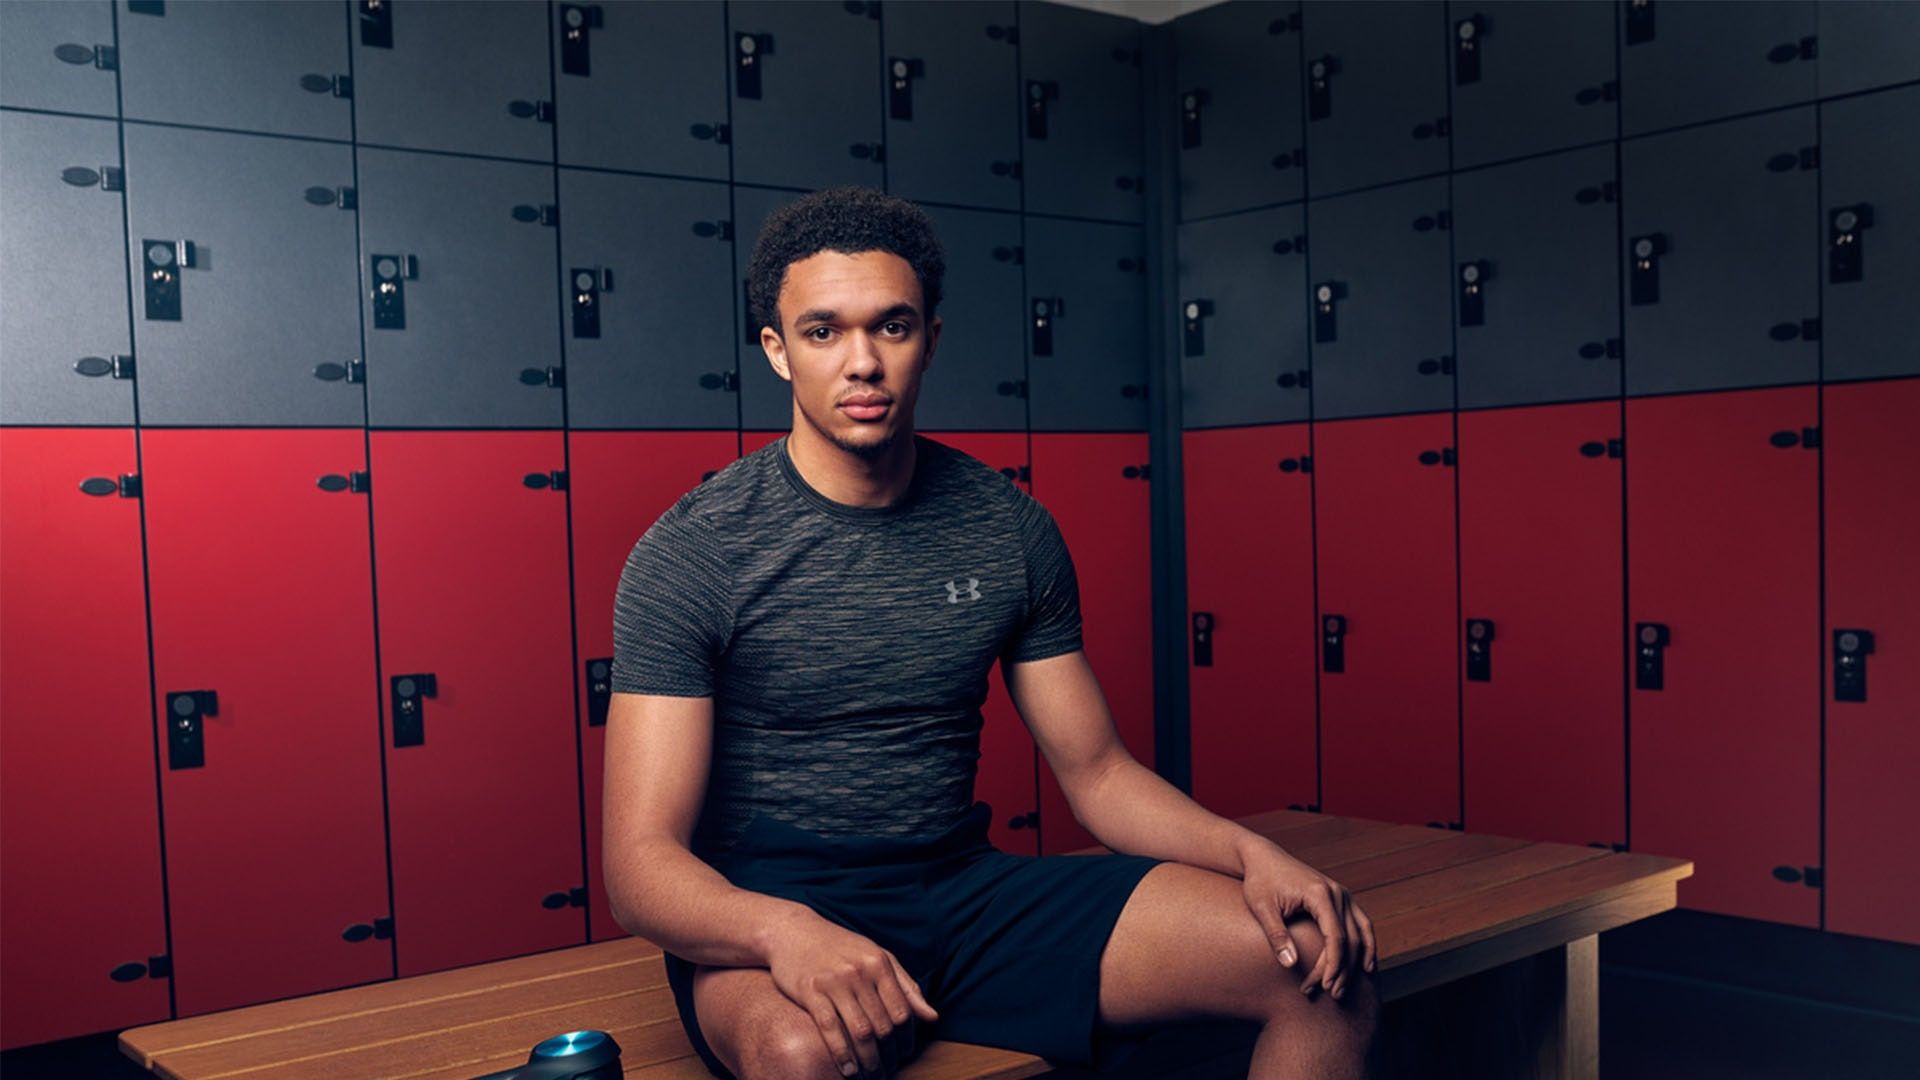 Trent Alexander Arnold on how his fitness changed in lockdown